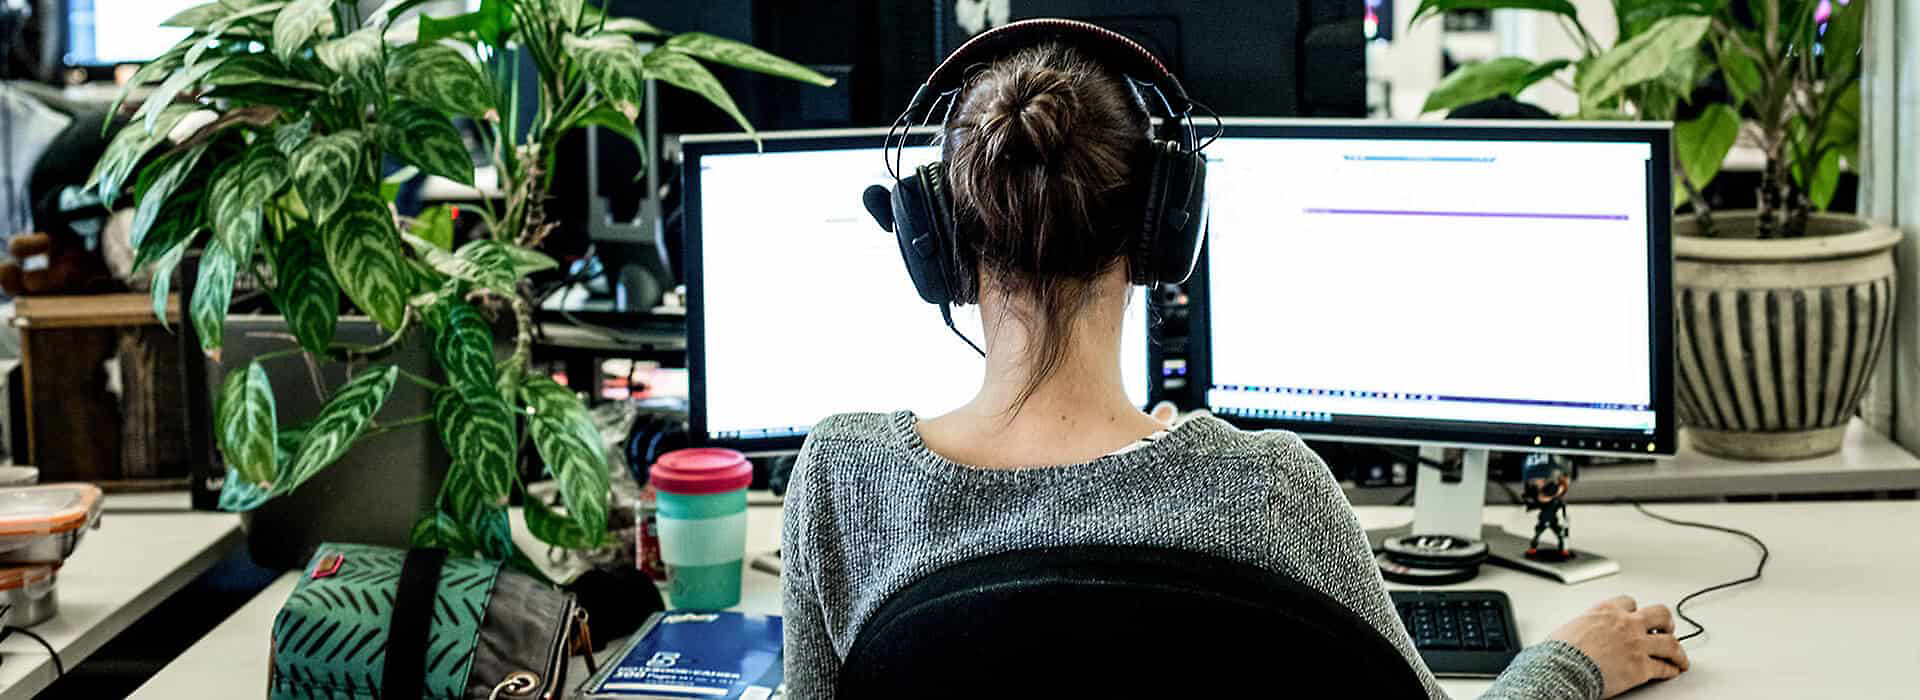 A person wearing over-the-ear headphones and working at their desk 